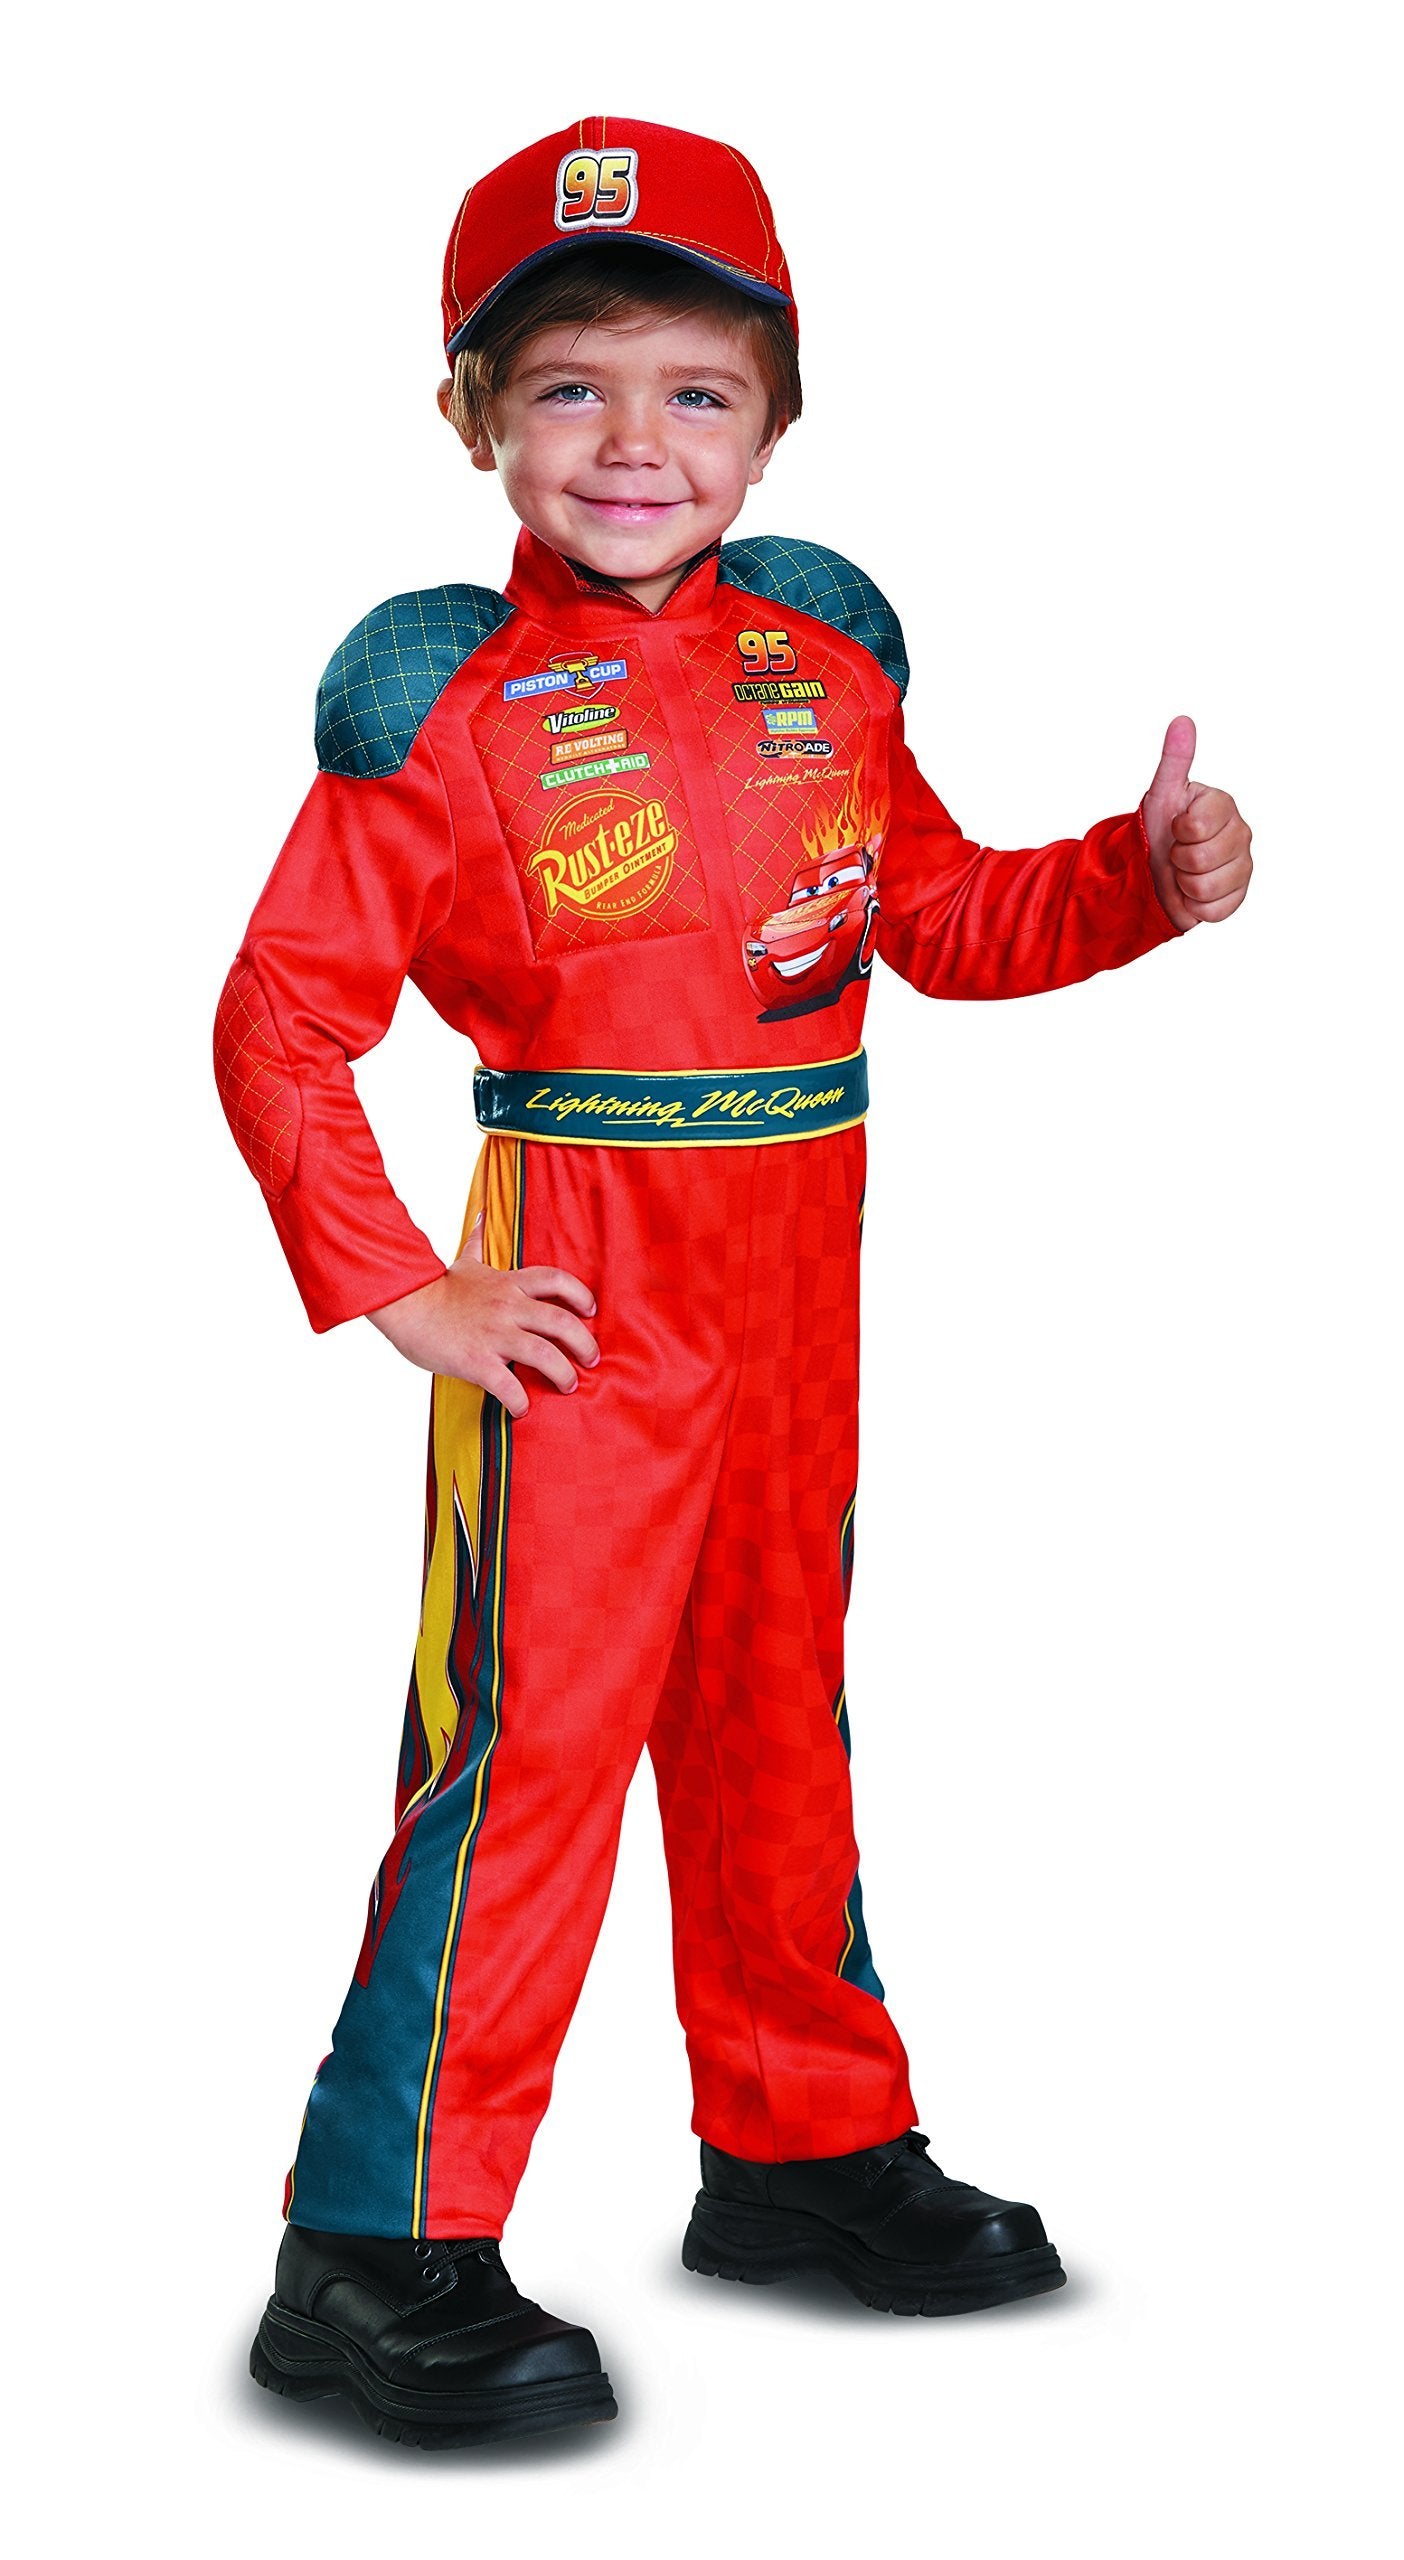 Cars 3 Lightning McQueen Toddler Costume Red Size M (3T-4T) Free Shipping